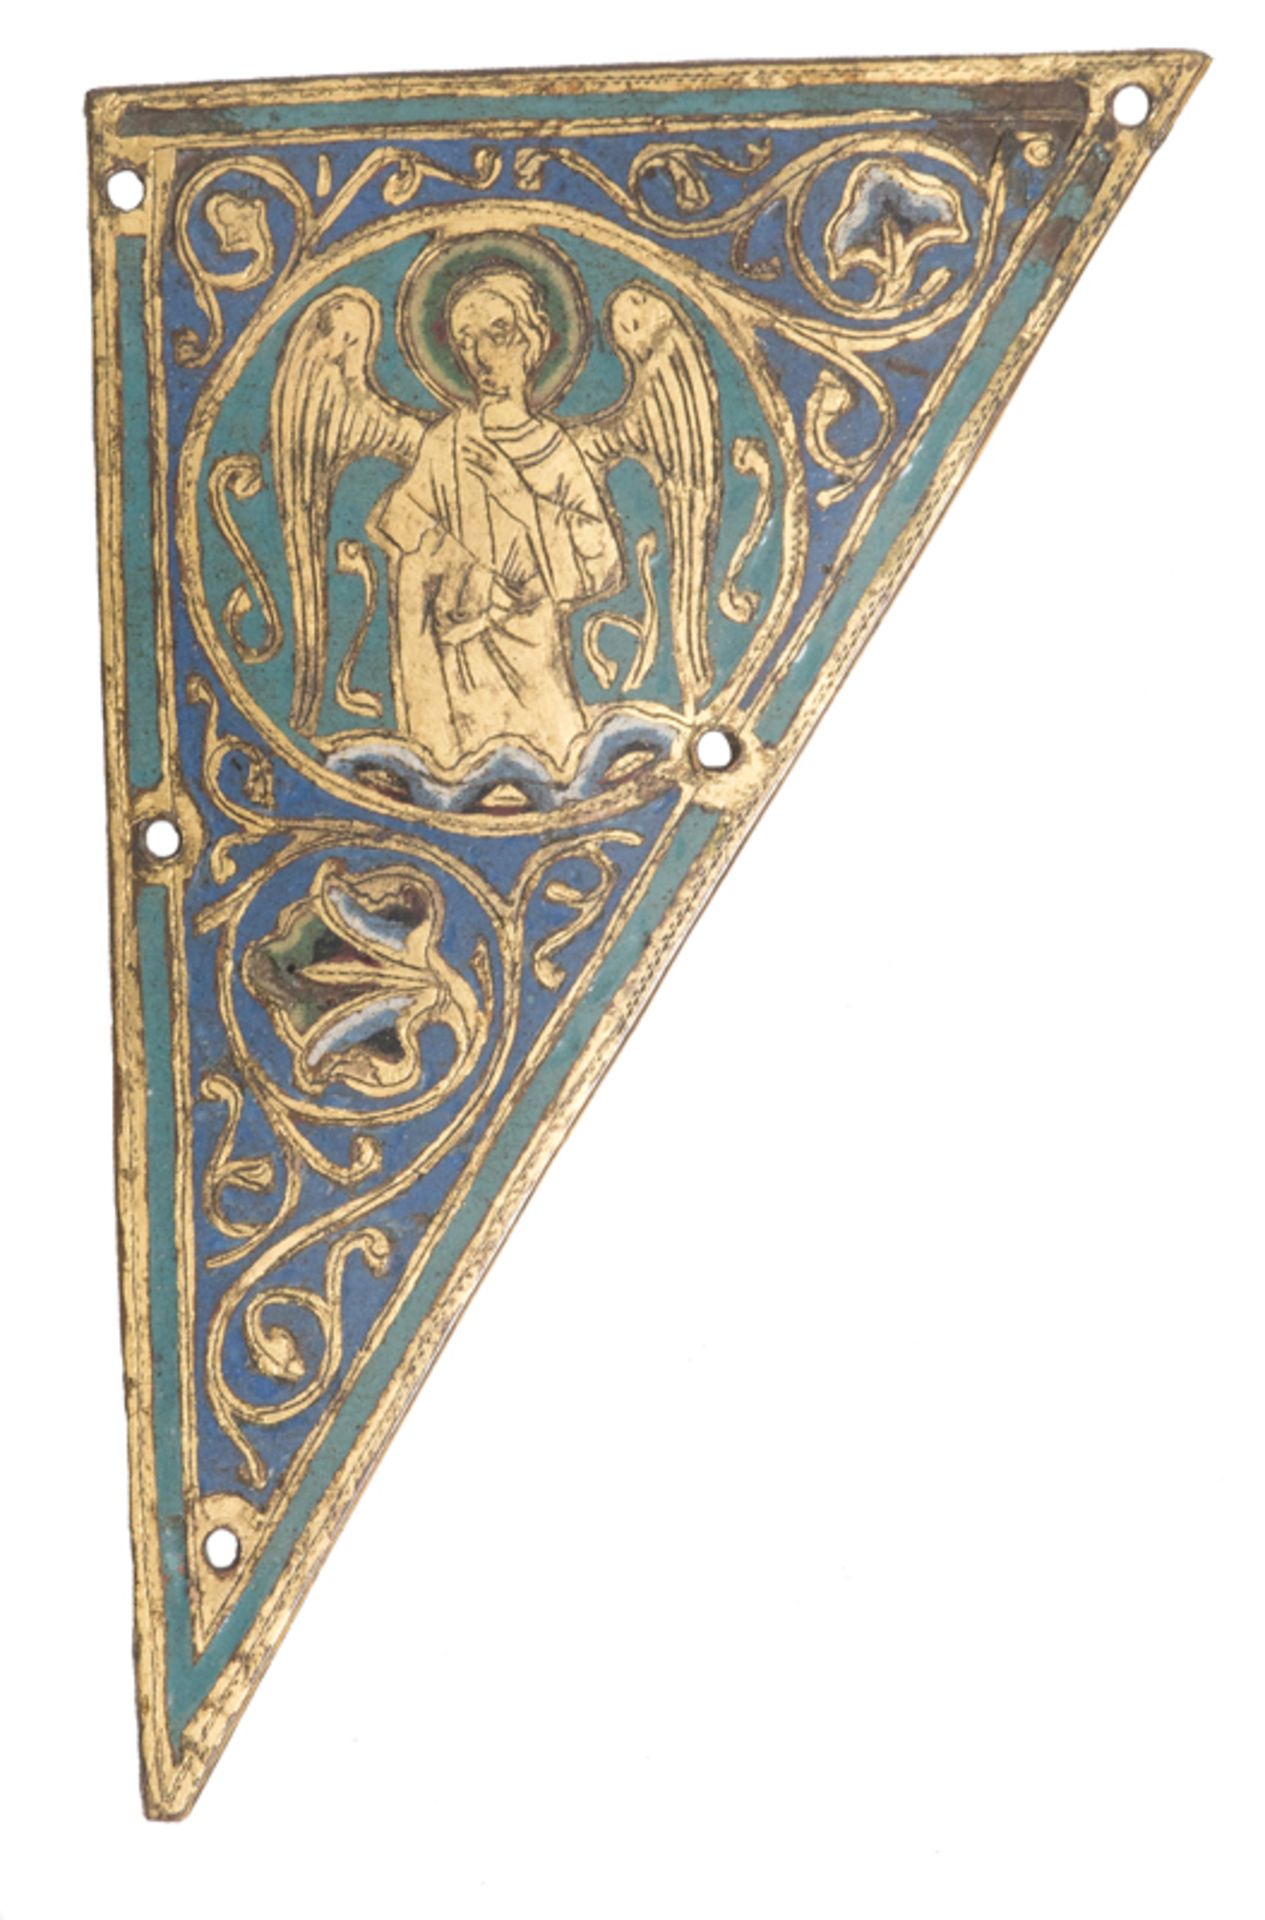 Two gilded and chased copper plaques with champlevé enamel. Limoges. France. Romanesque. c.1225-1250 - Image 2 of 6